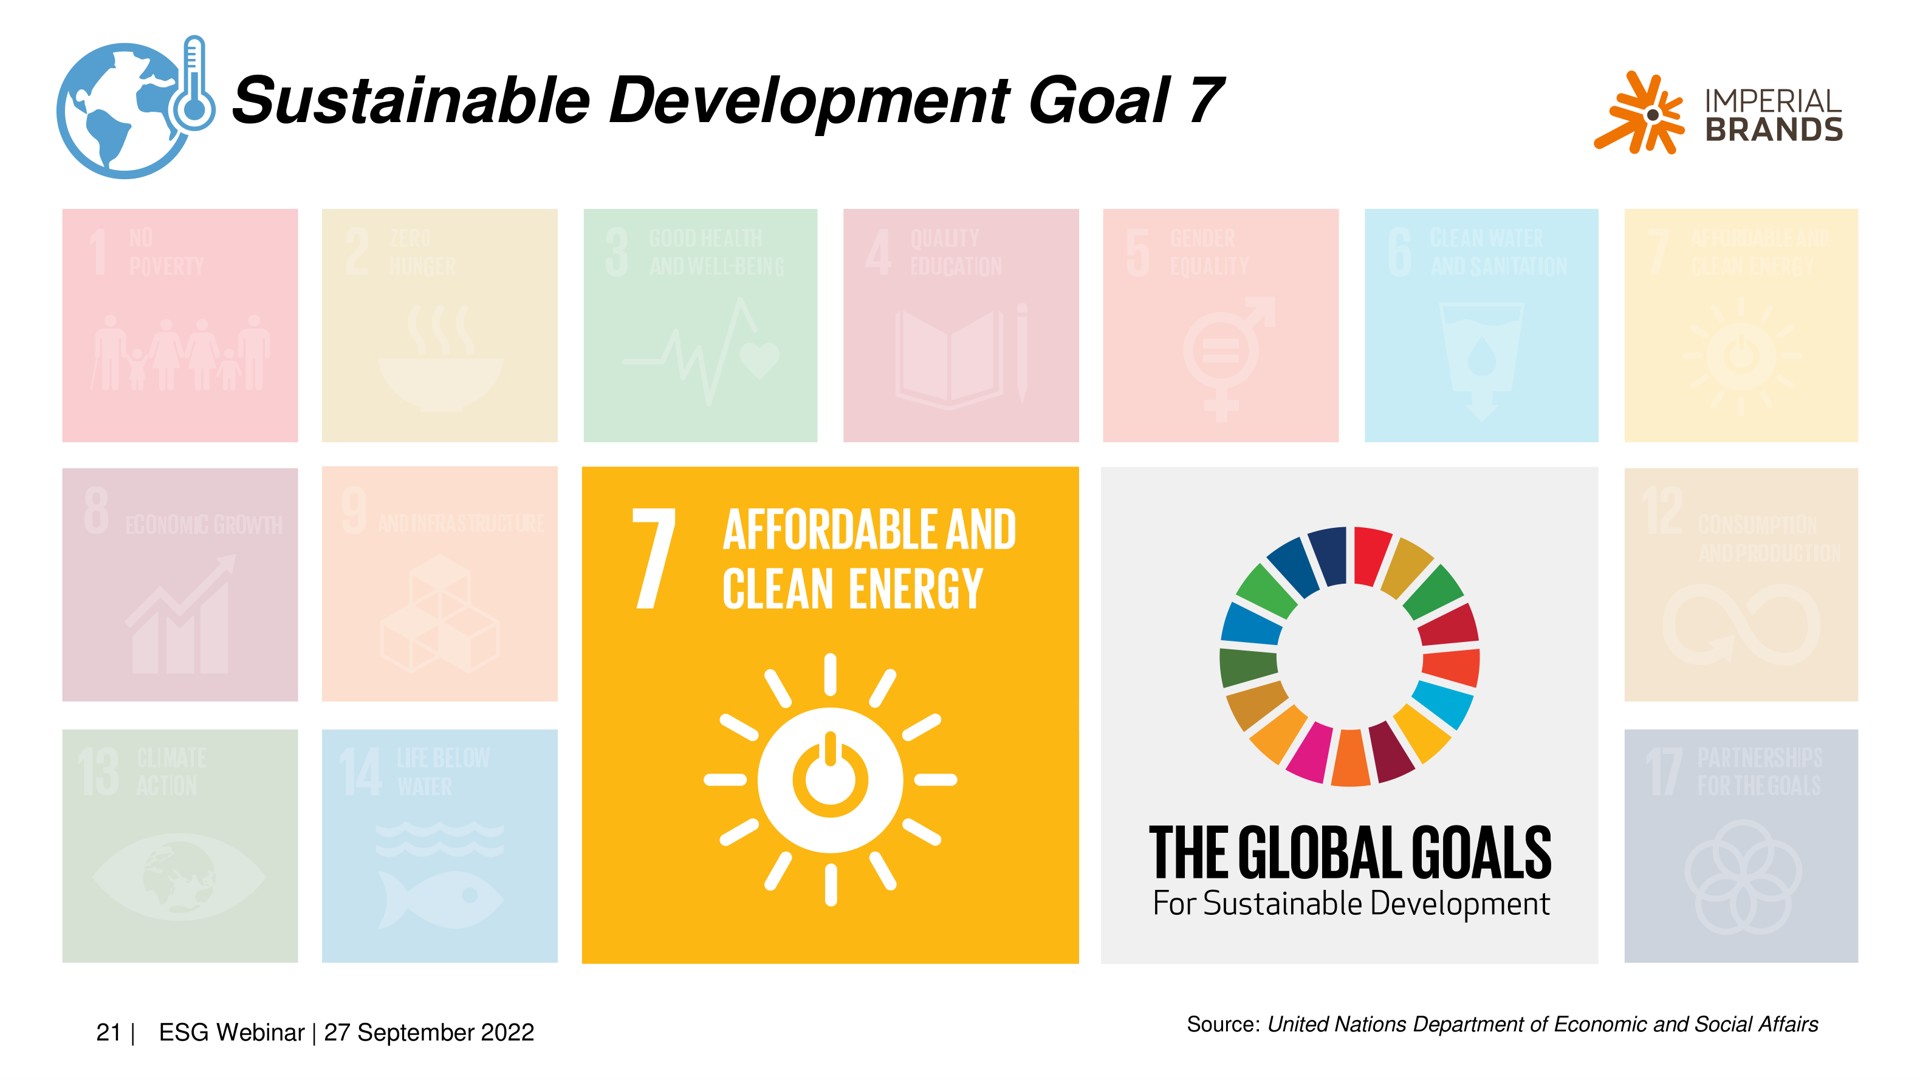 sustainable development goal a imperial ais the global goals | Imperial Brands